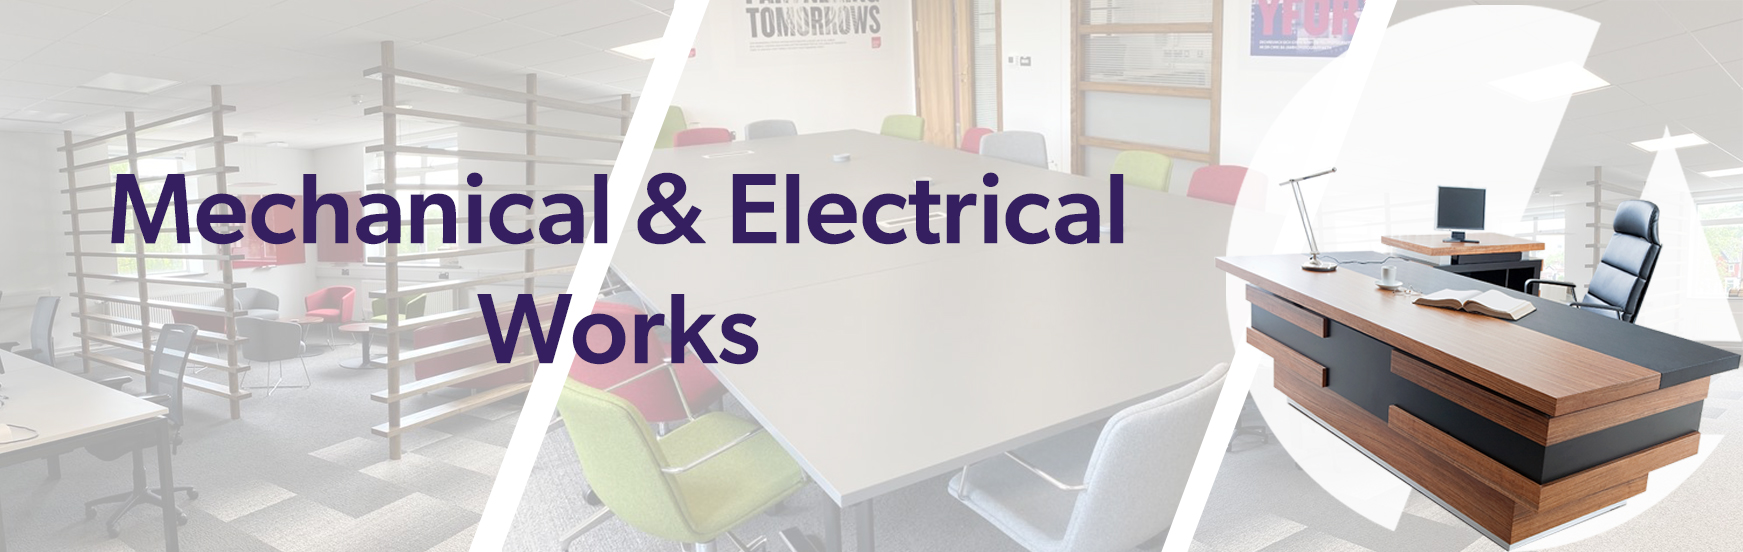 mechanical electrical works